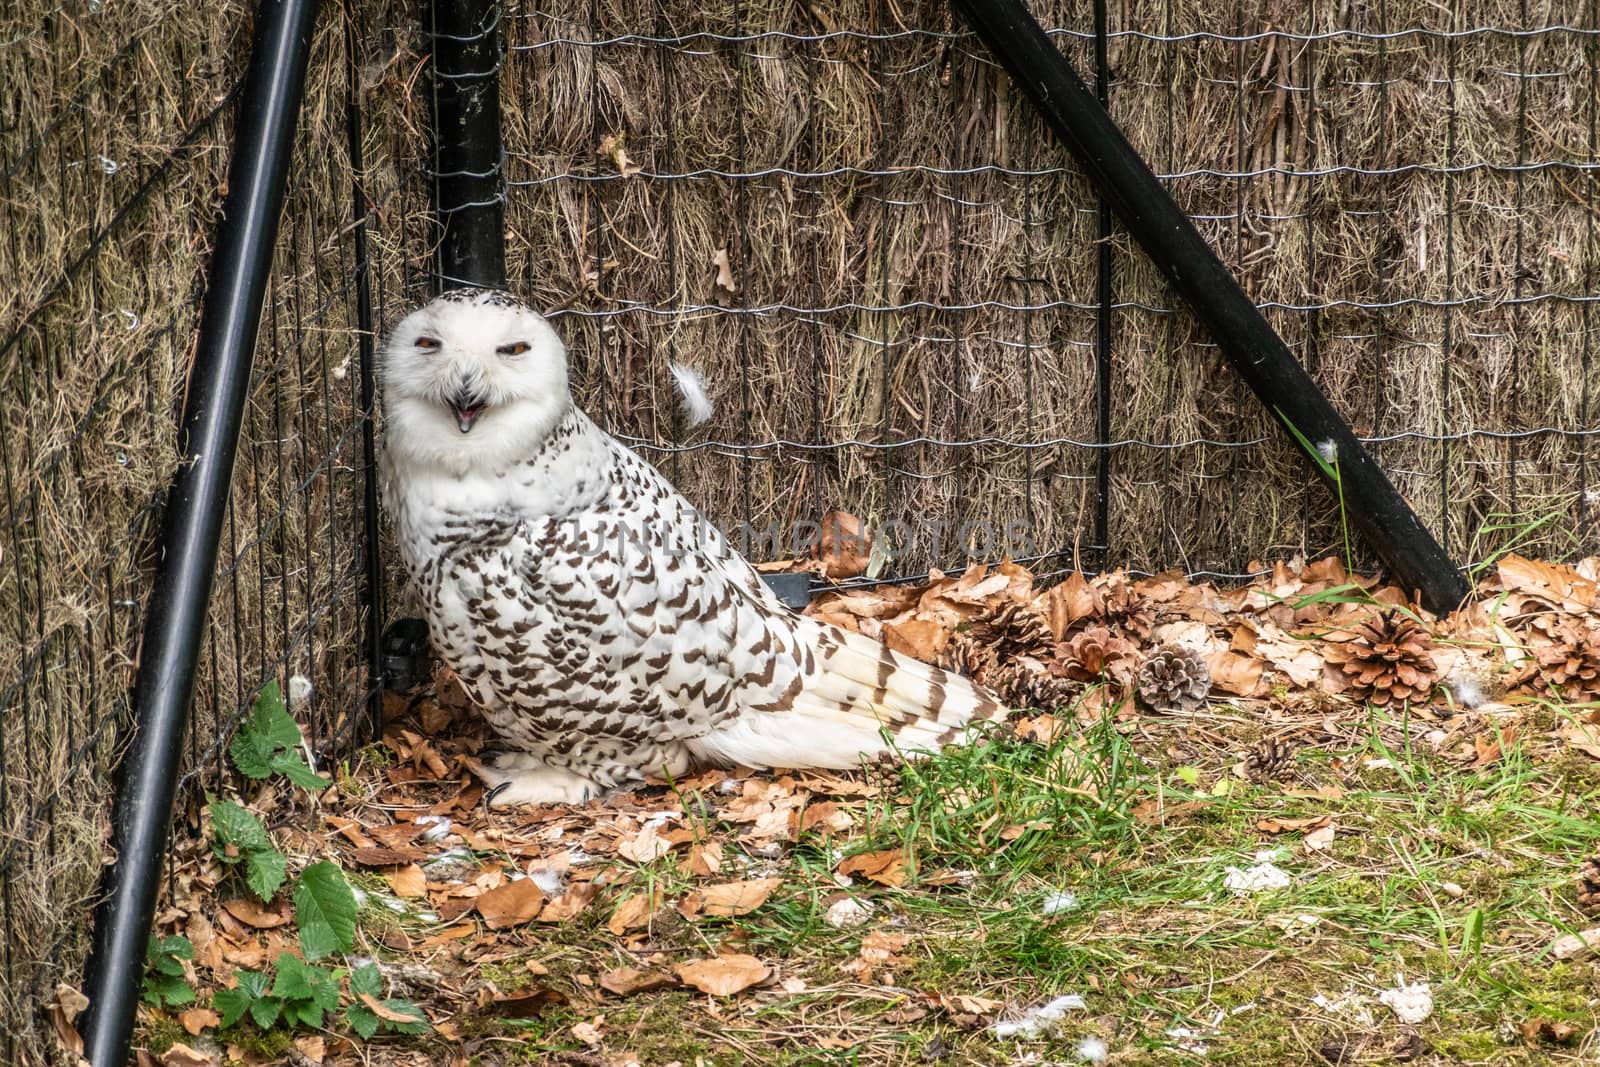 Snowy Owl in captivity at animal park in Han-sur-lesse, Belgium. by Claudine